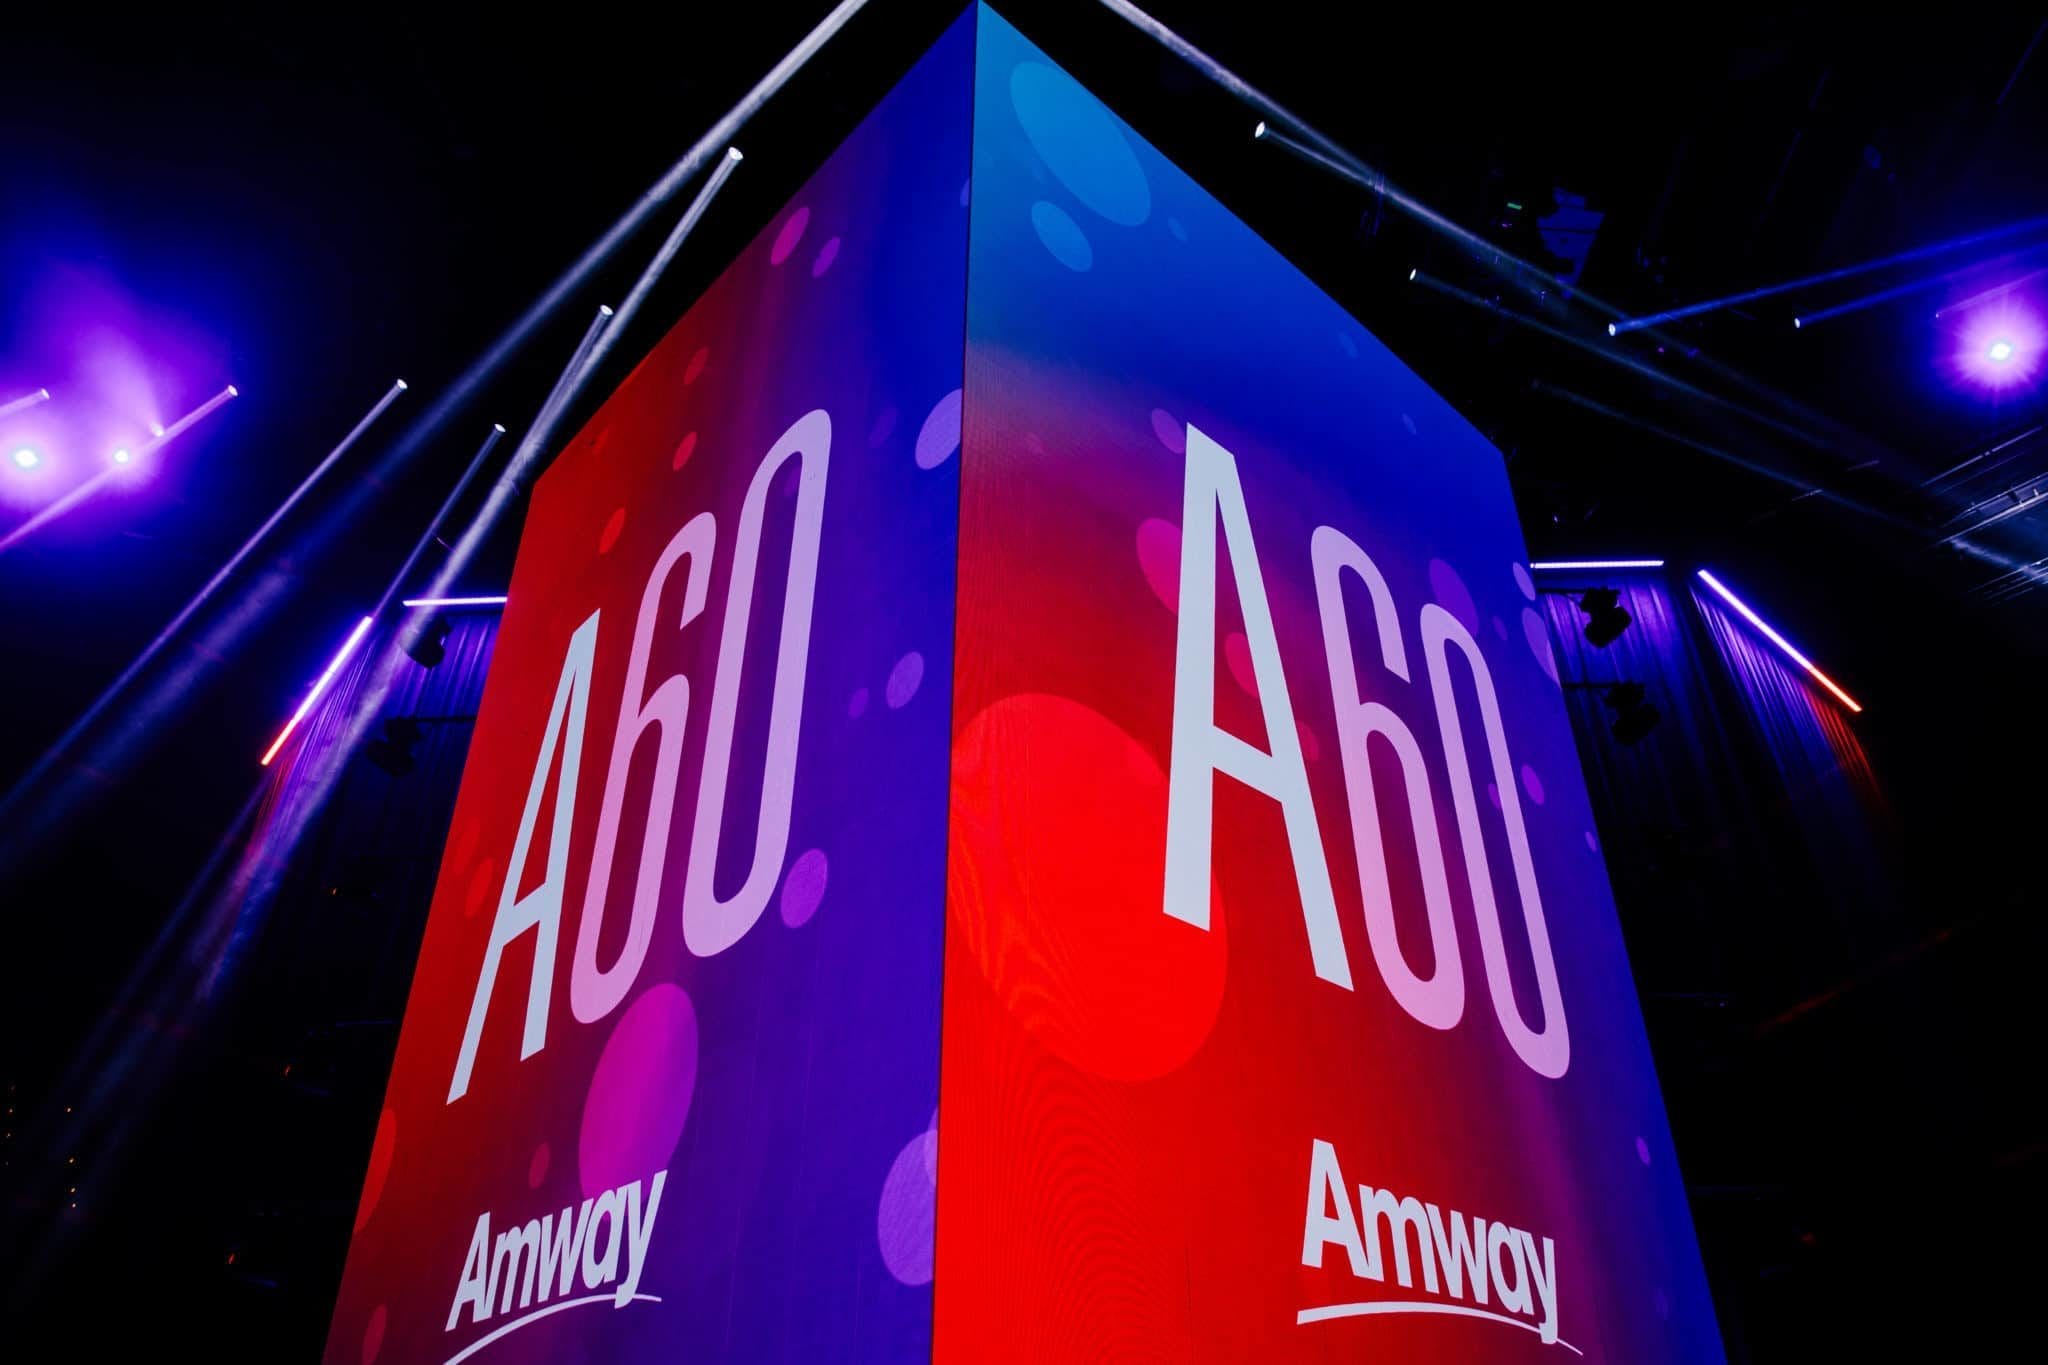 Amway shares plans for future growth during 60th anniversary